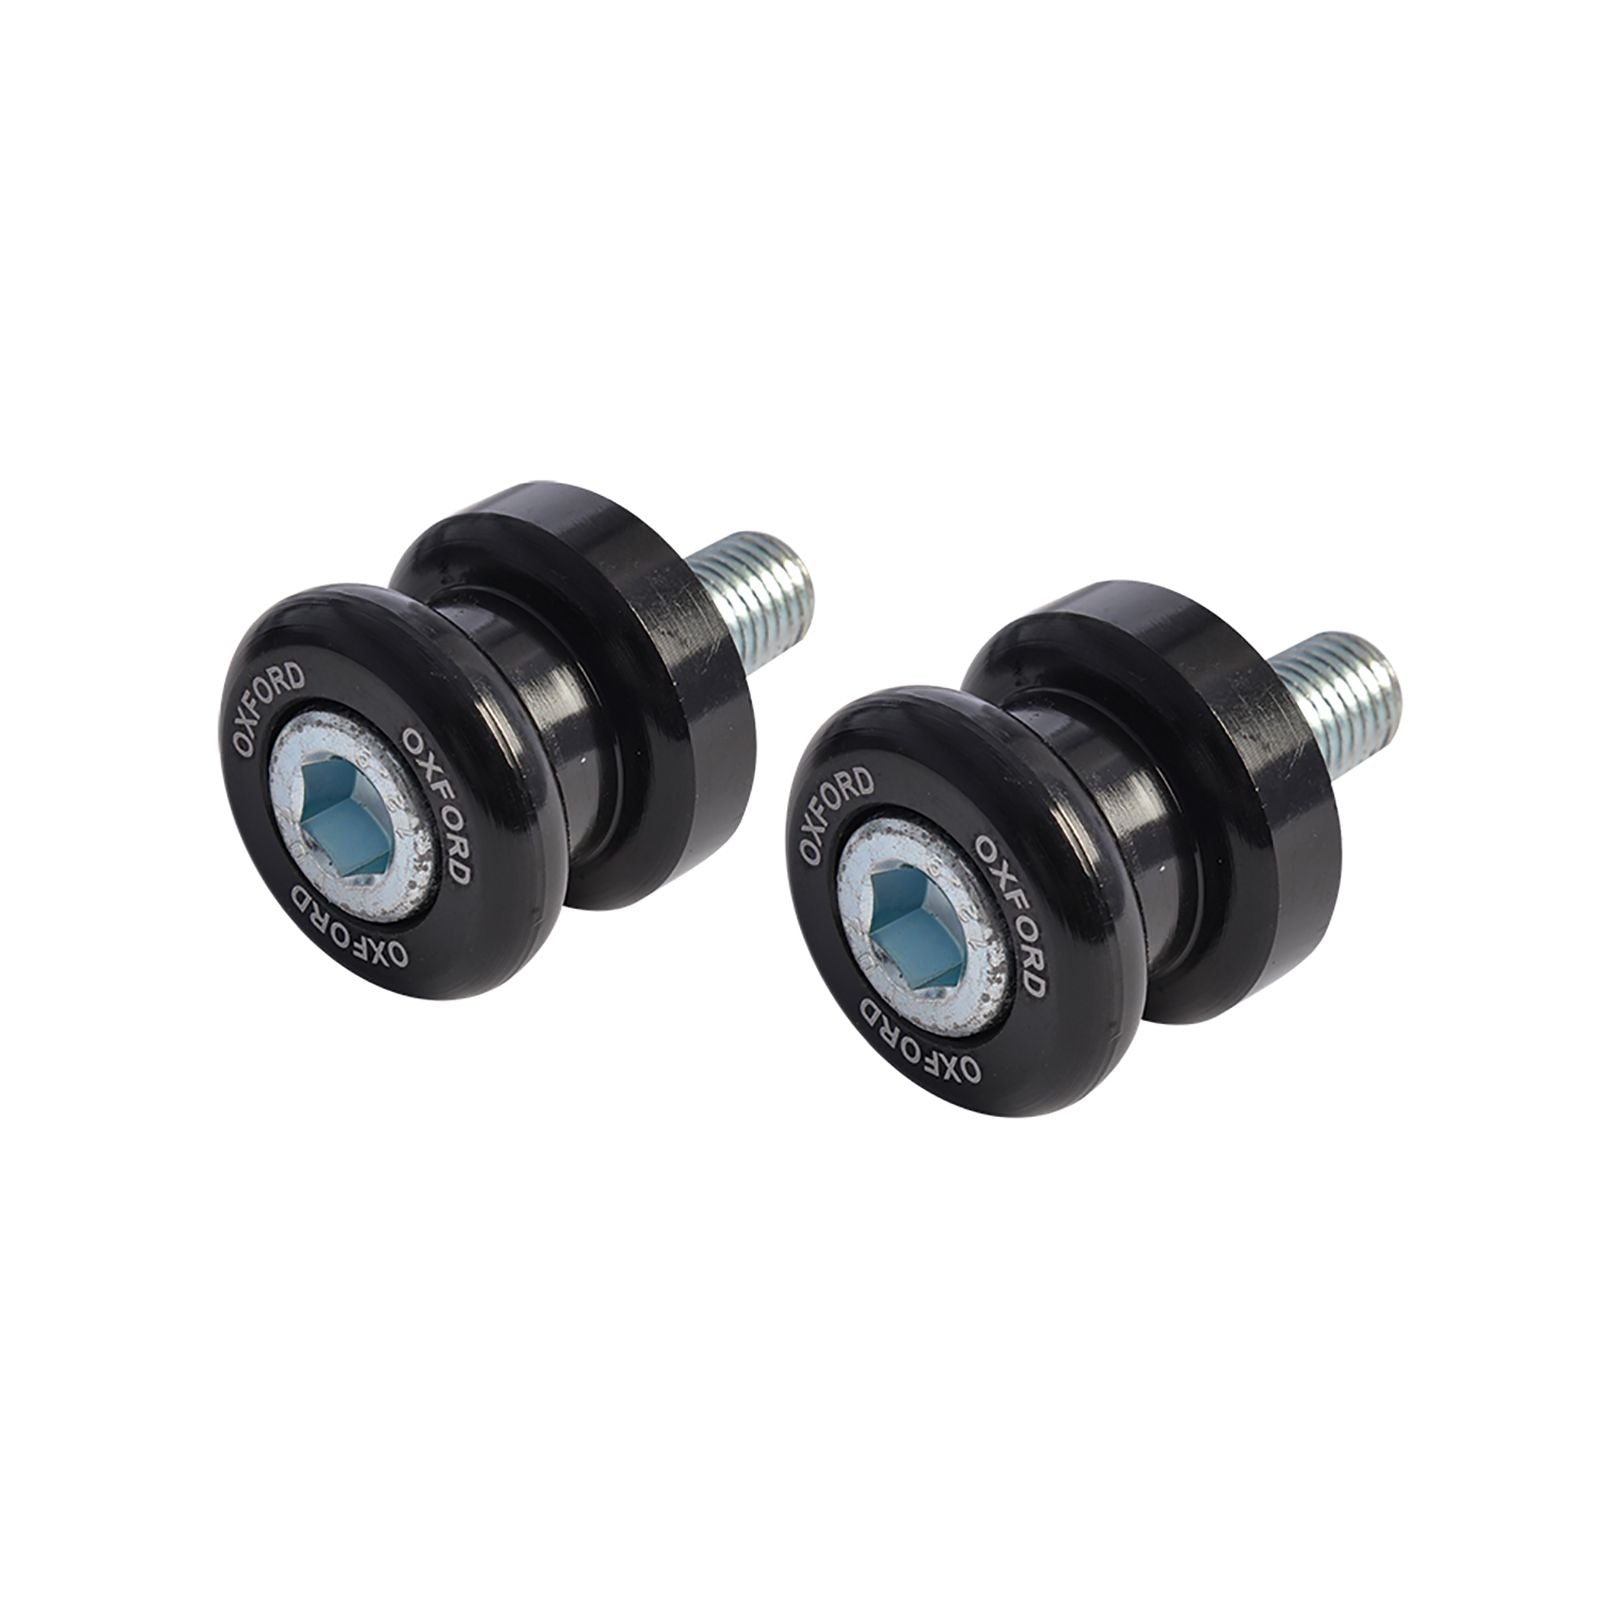 New OXFORD Stand Bobbins M8 1.25 Thread - Black For BMW S1000RR #OXOX789